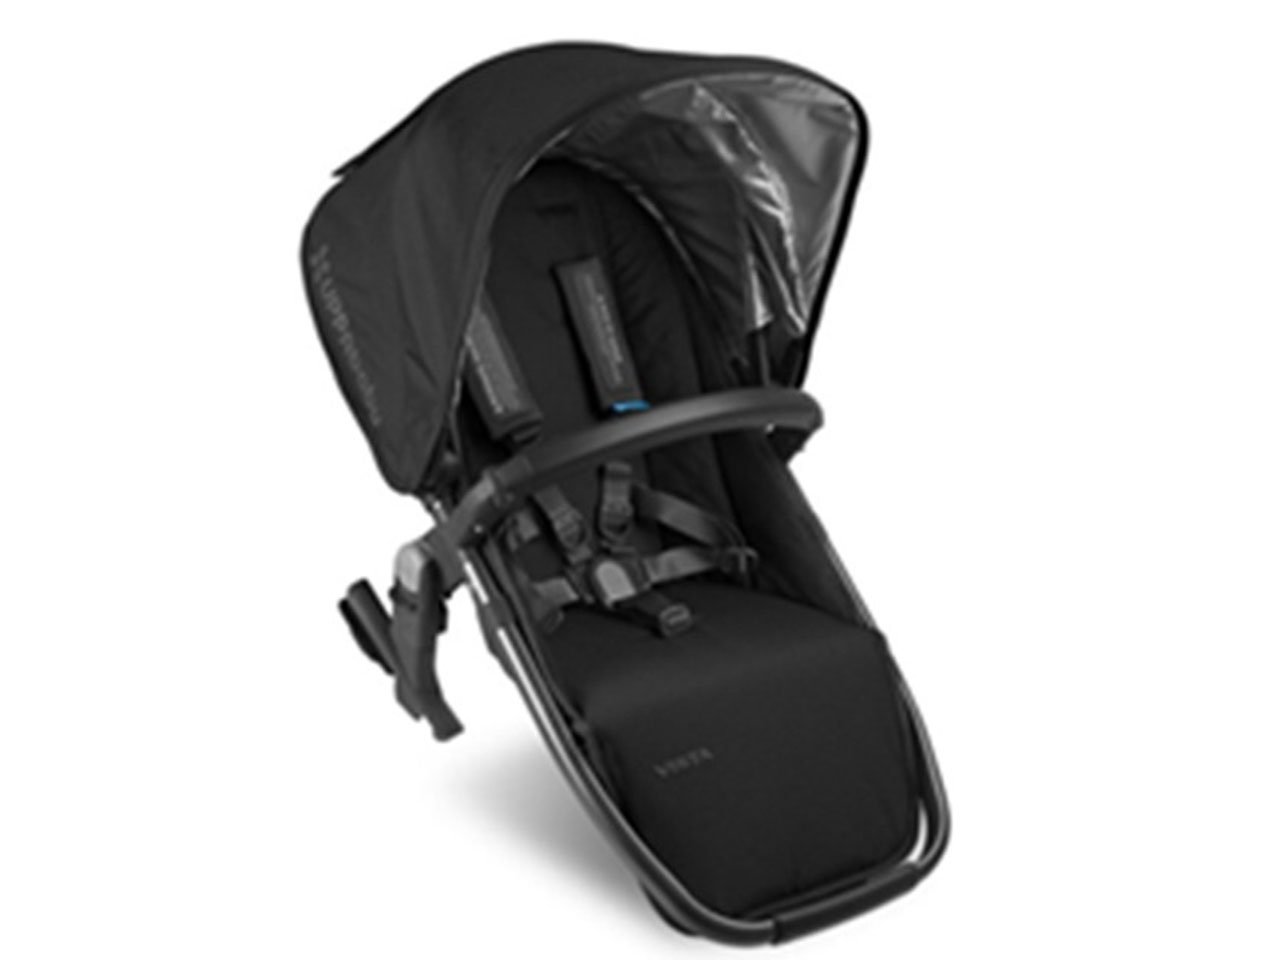 uppababy 2017 rumble seat